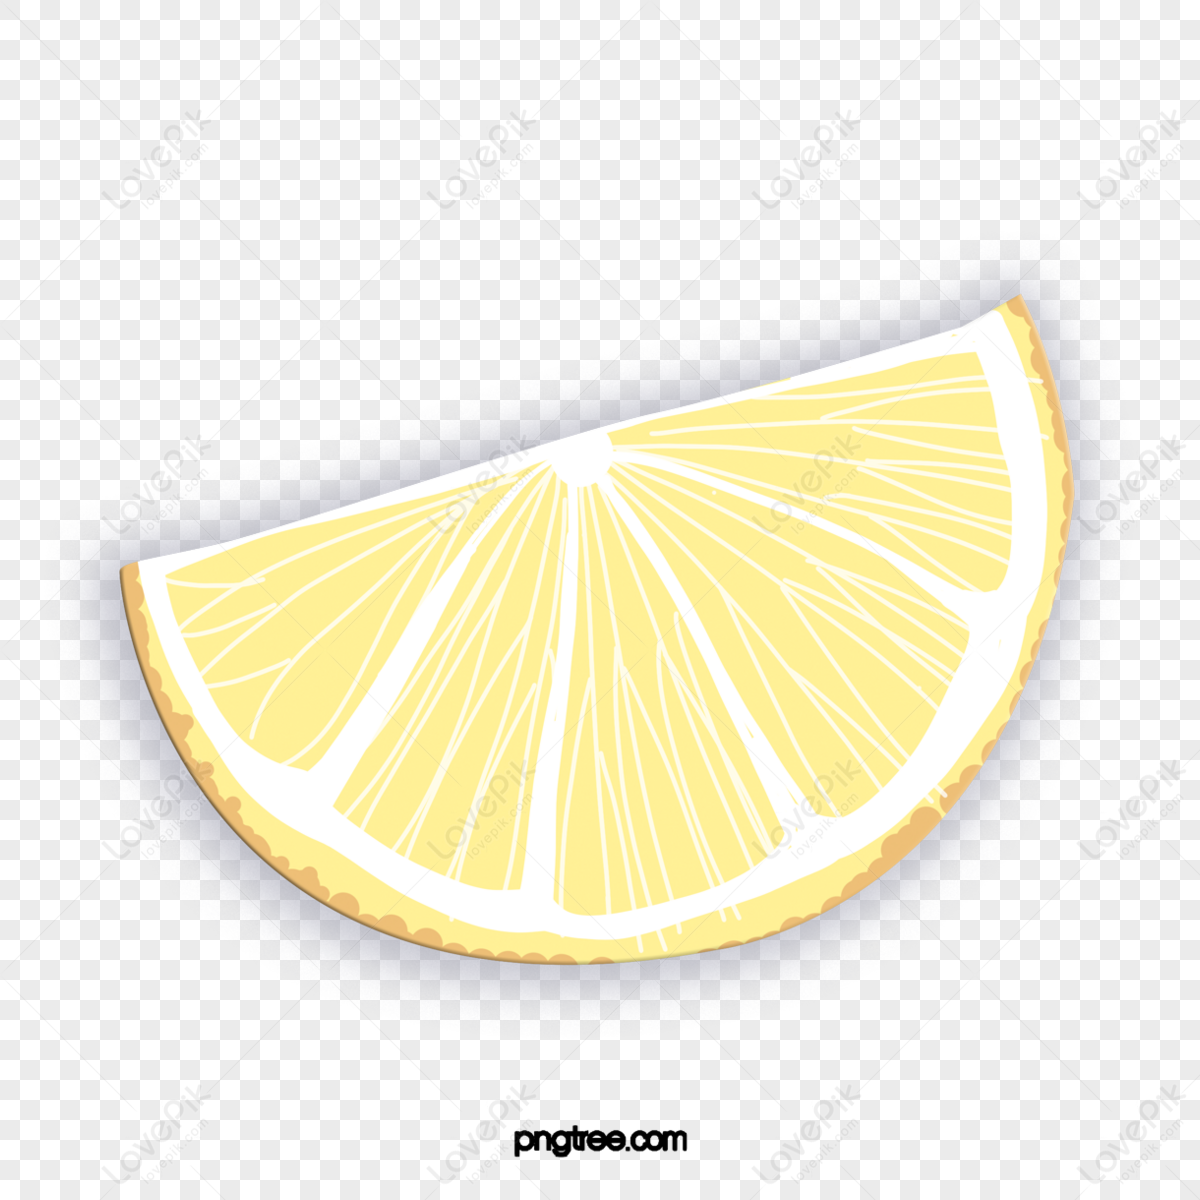 Fruit Slices PNG Images With Transparent Background